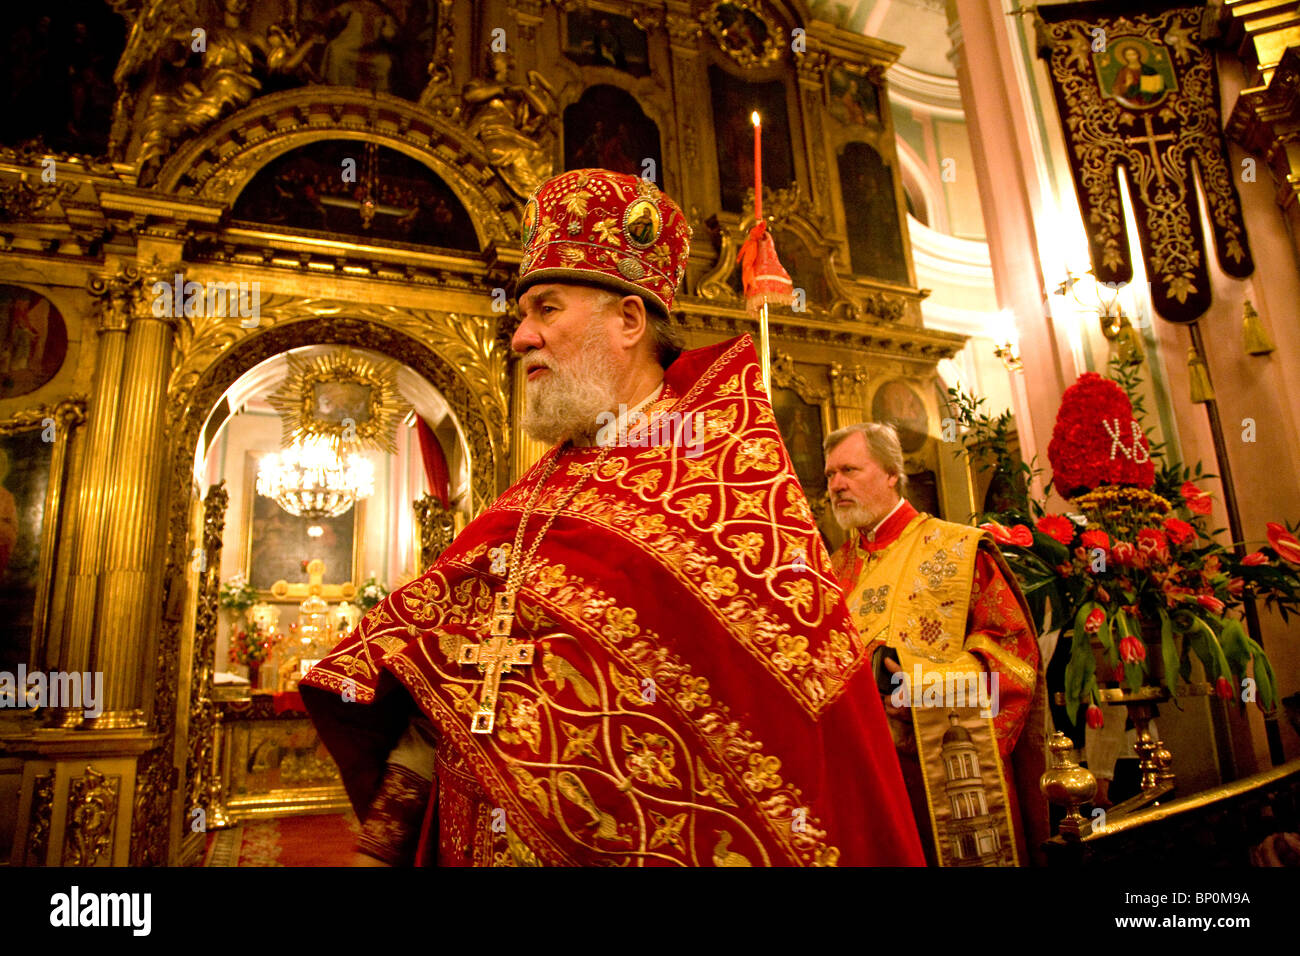 Russia; St. Petersburg; The high priest, Russian Orthodox Easter